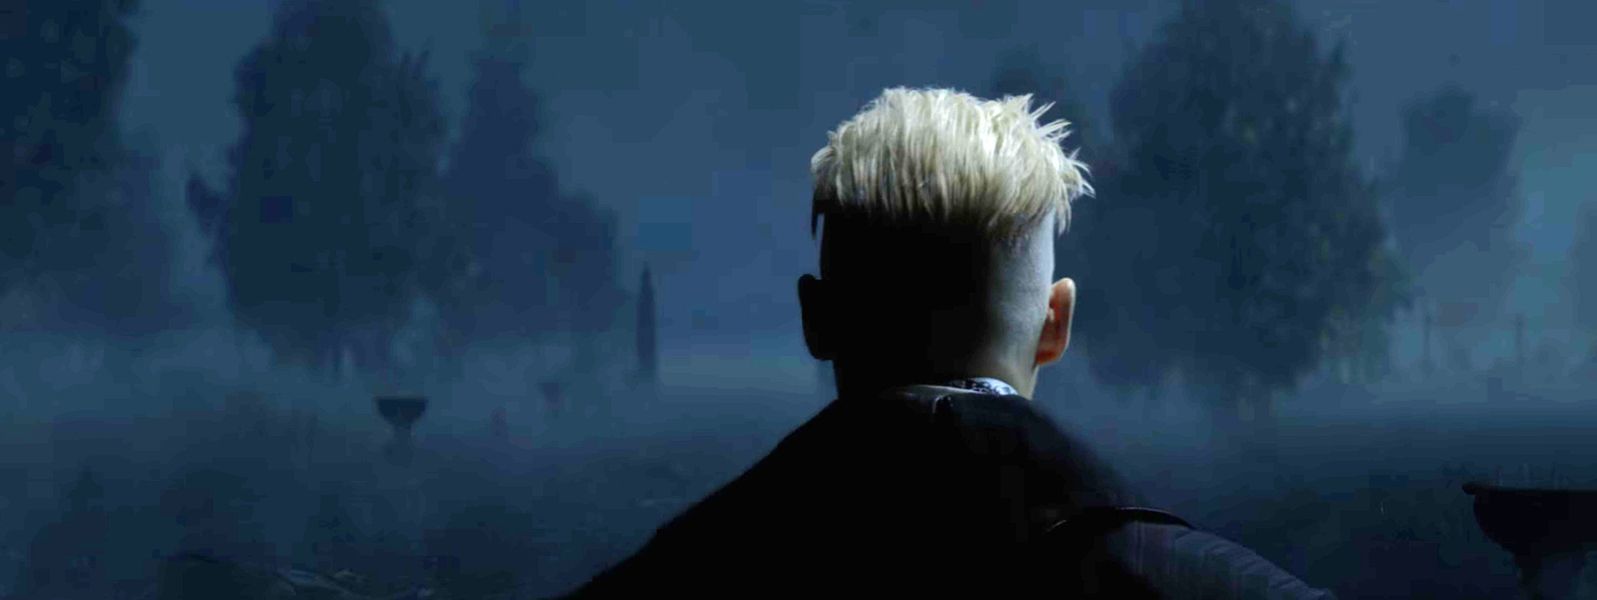 First Look Fantastic Beasts The Crimes Of Grindelwald